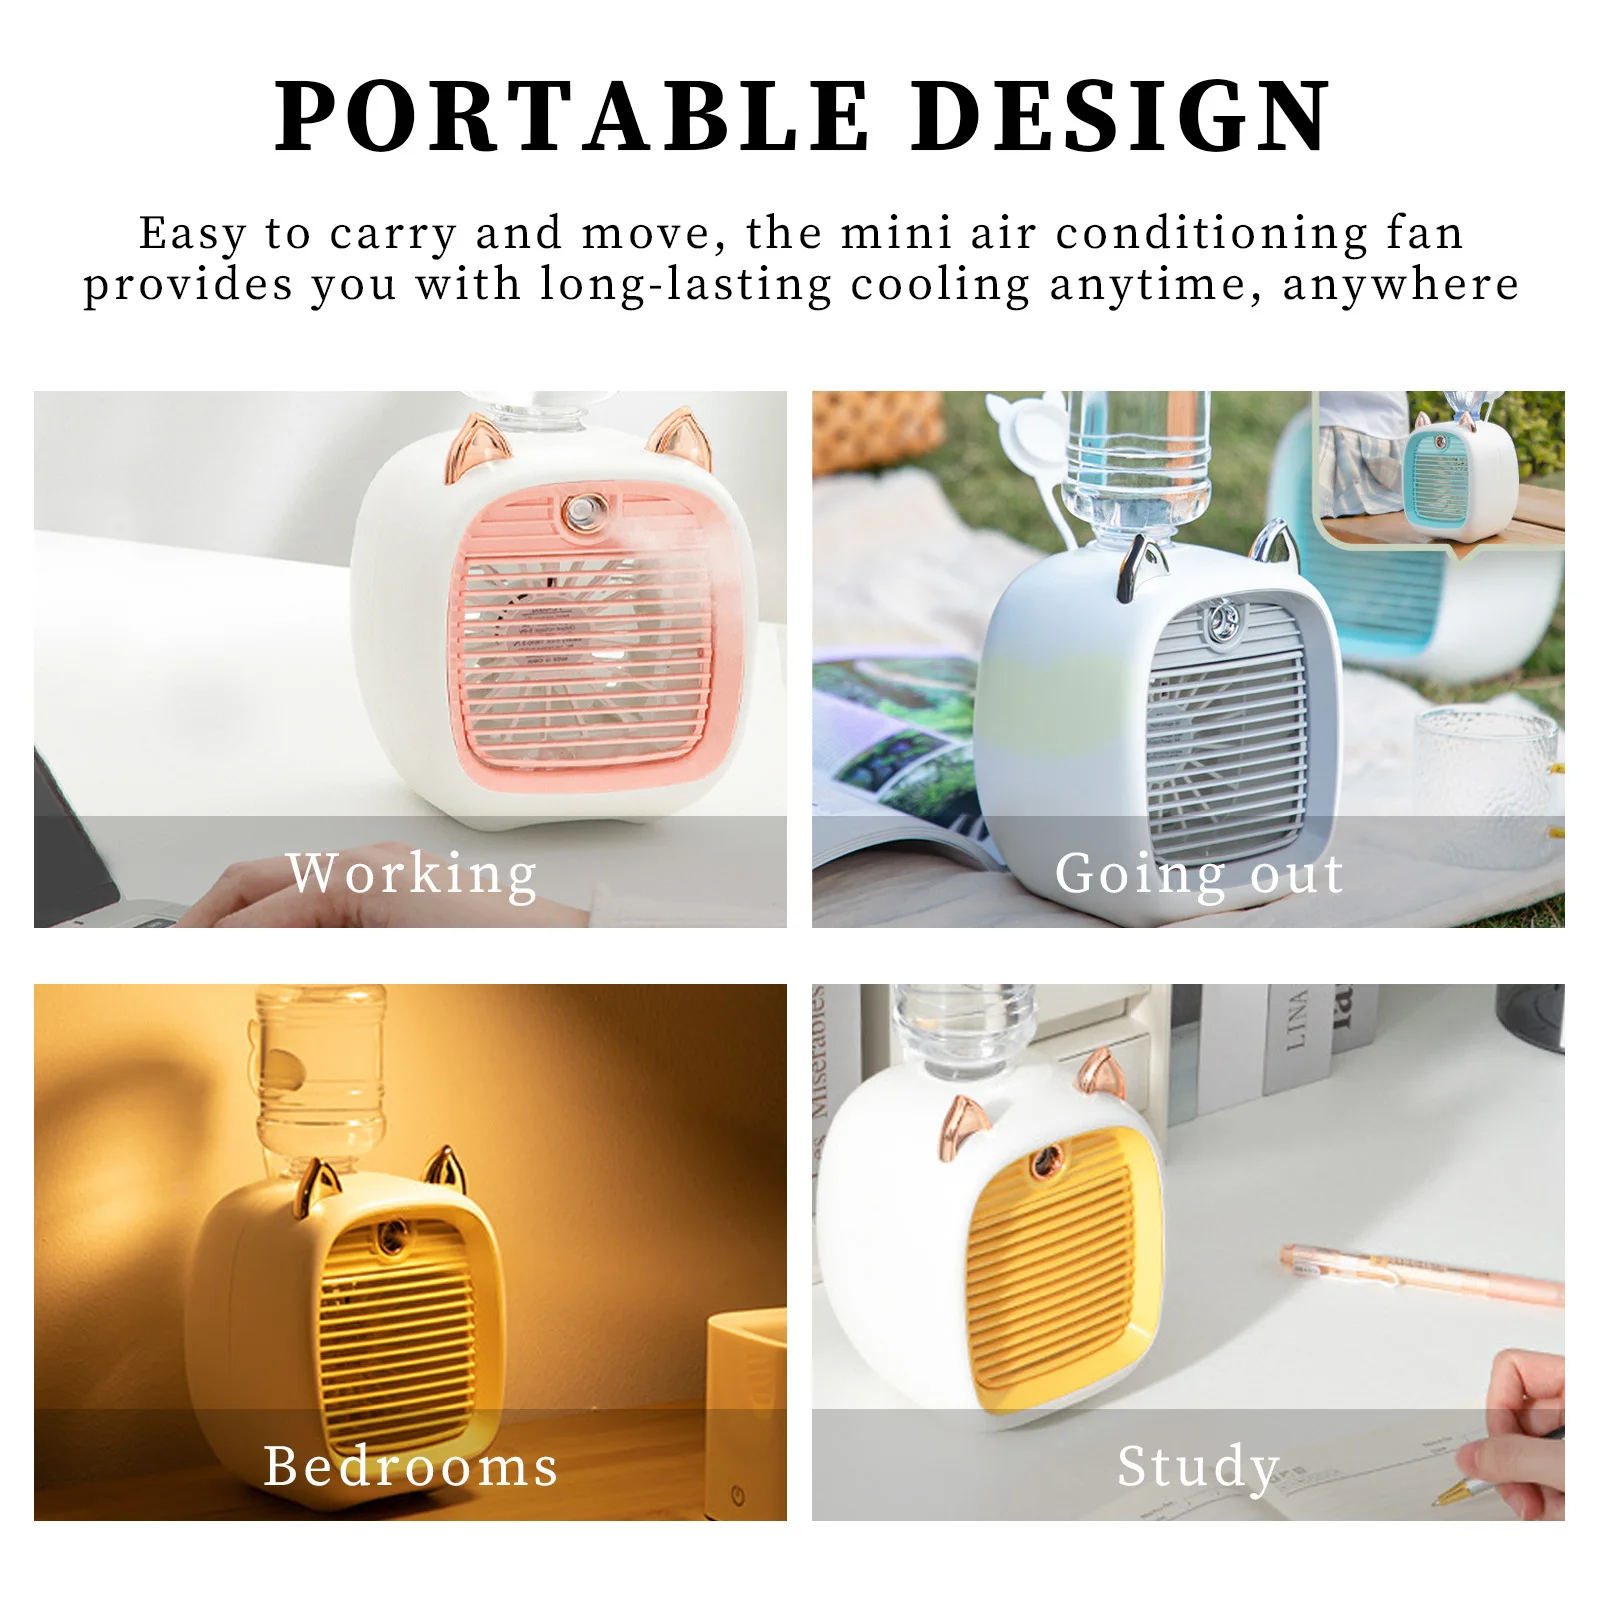 

USB Water Cooling Table Fan Mini 2400mAh Humidifier Purifier Fan 2 Spray Modes Type-C Charging with Water Bottle for Office Home